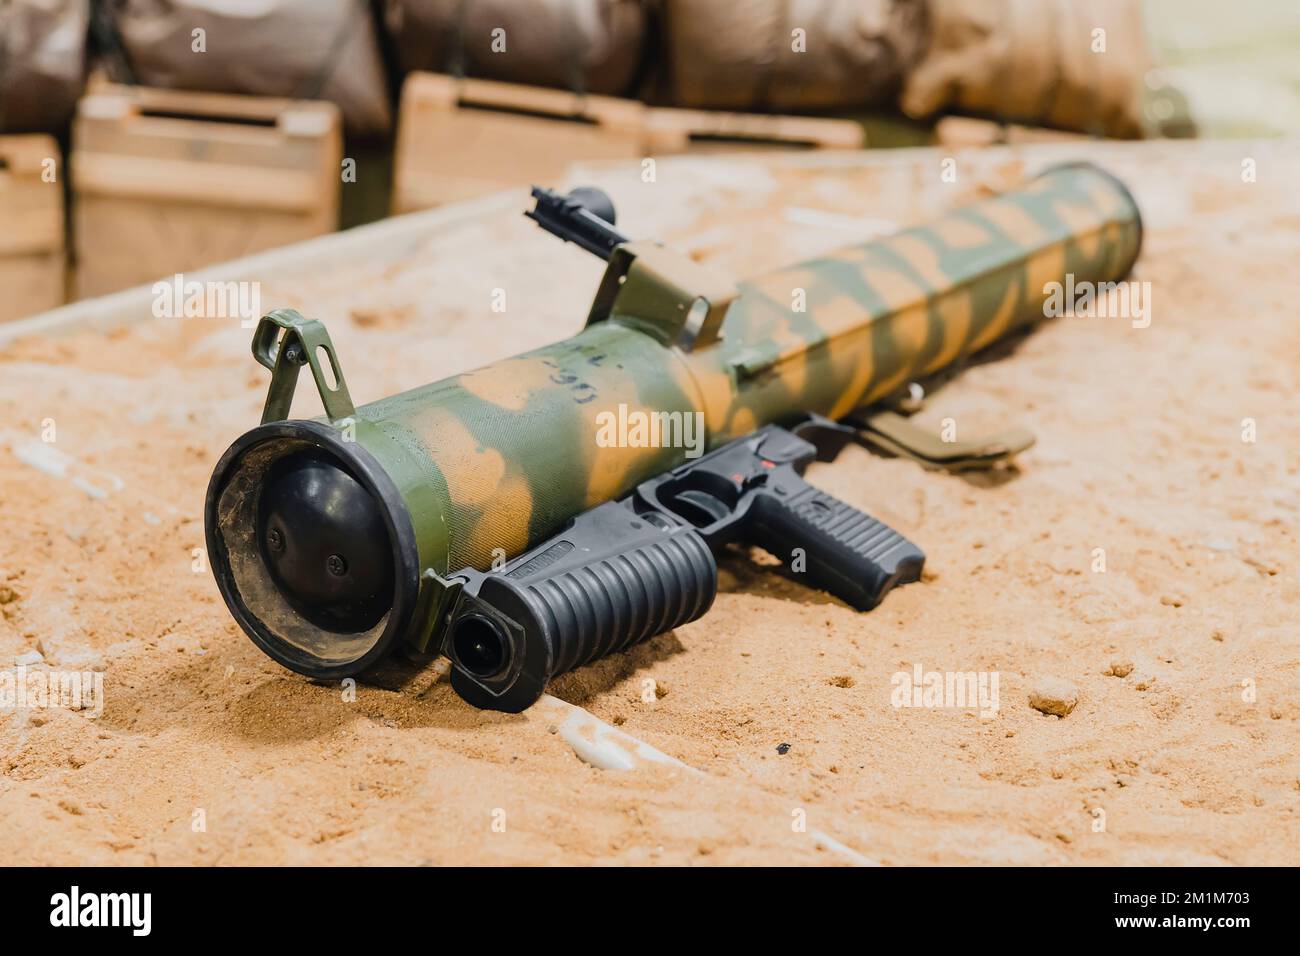 Military, Shooting RPG anti tank grenade launcher lying on the sand. war trophy. military supplies of heavy weapons Stock Photo